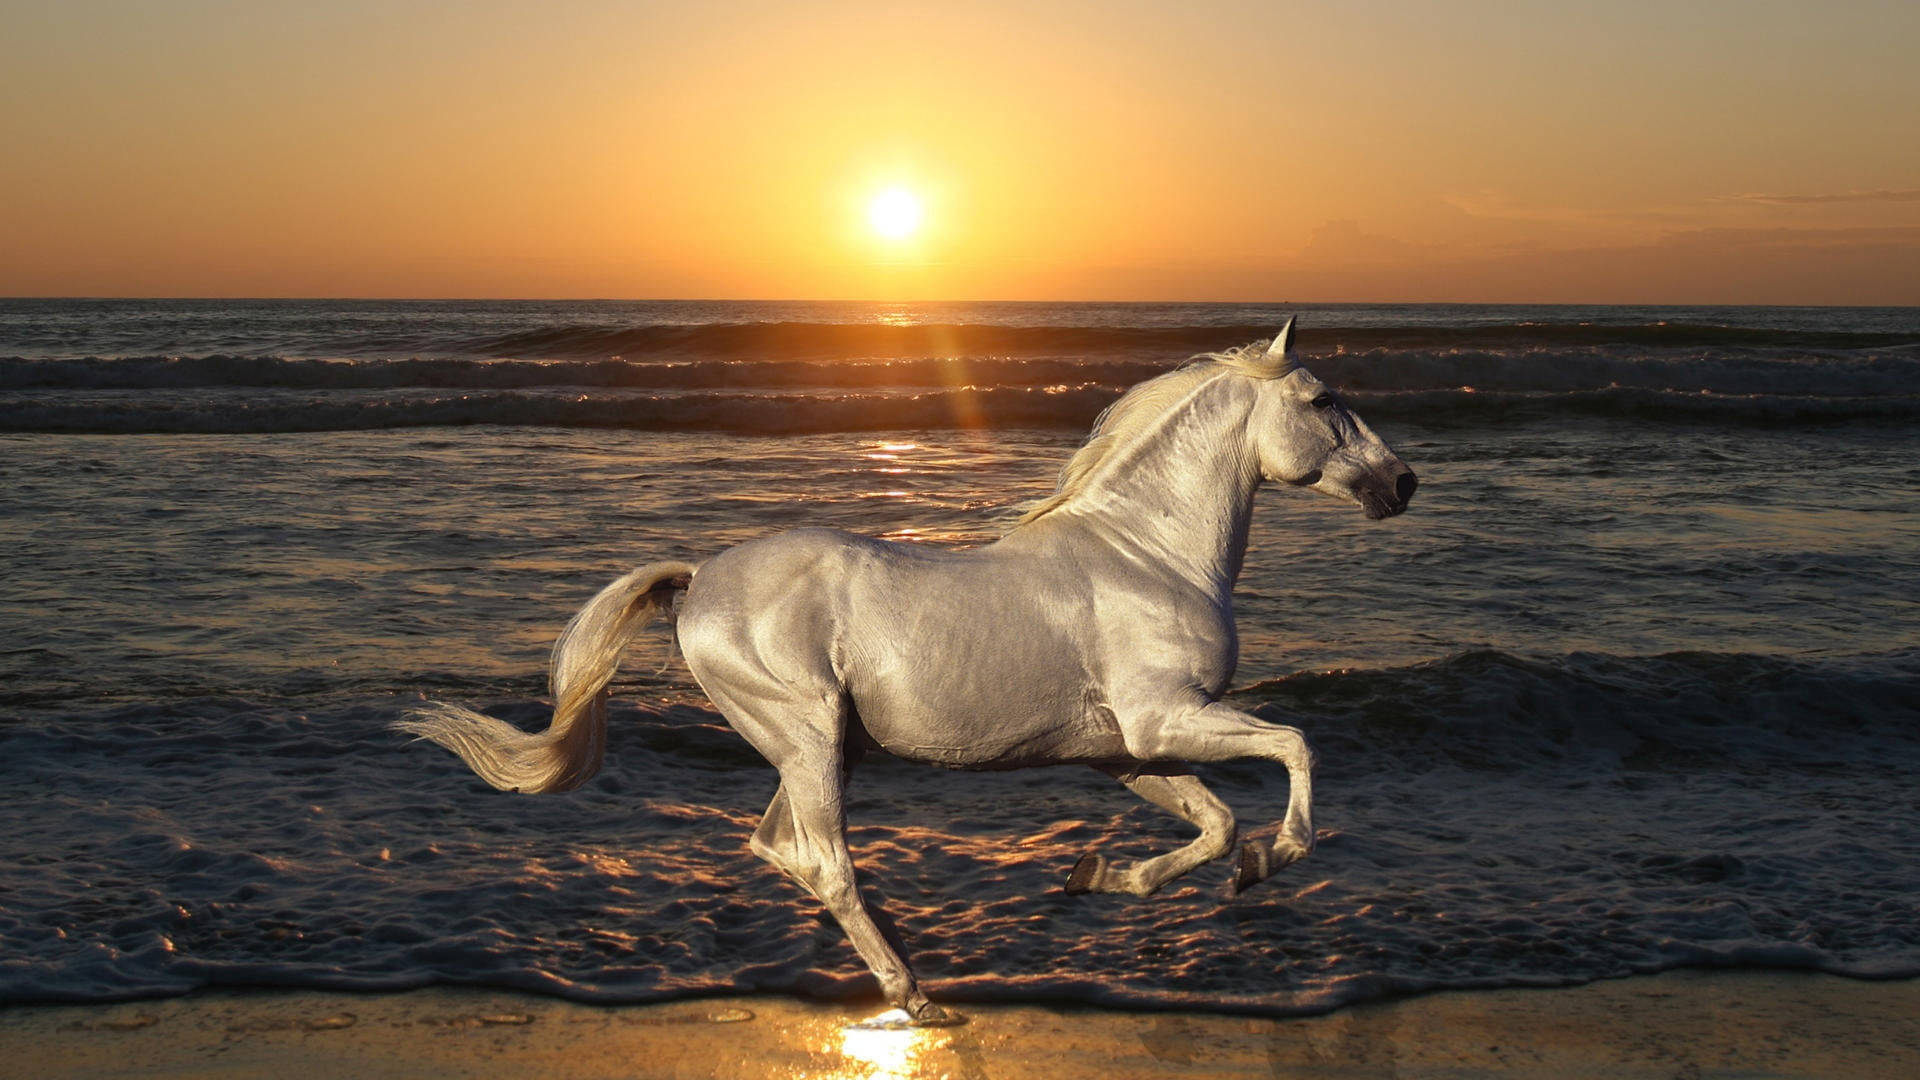 Running Horse Pictures Wallpaper